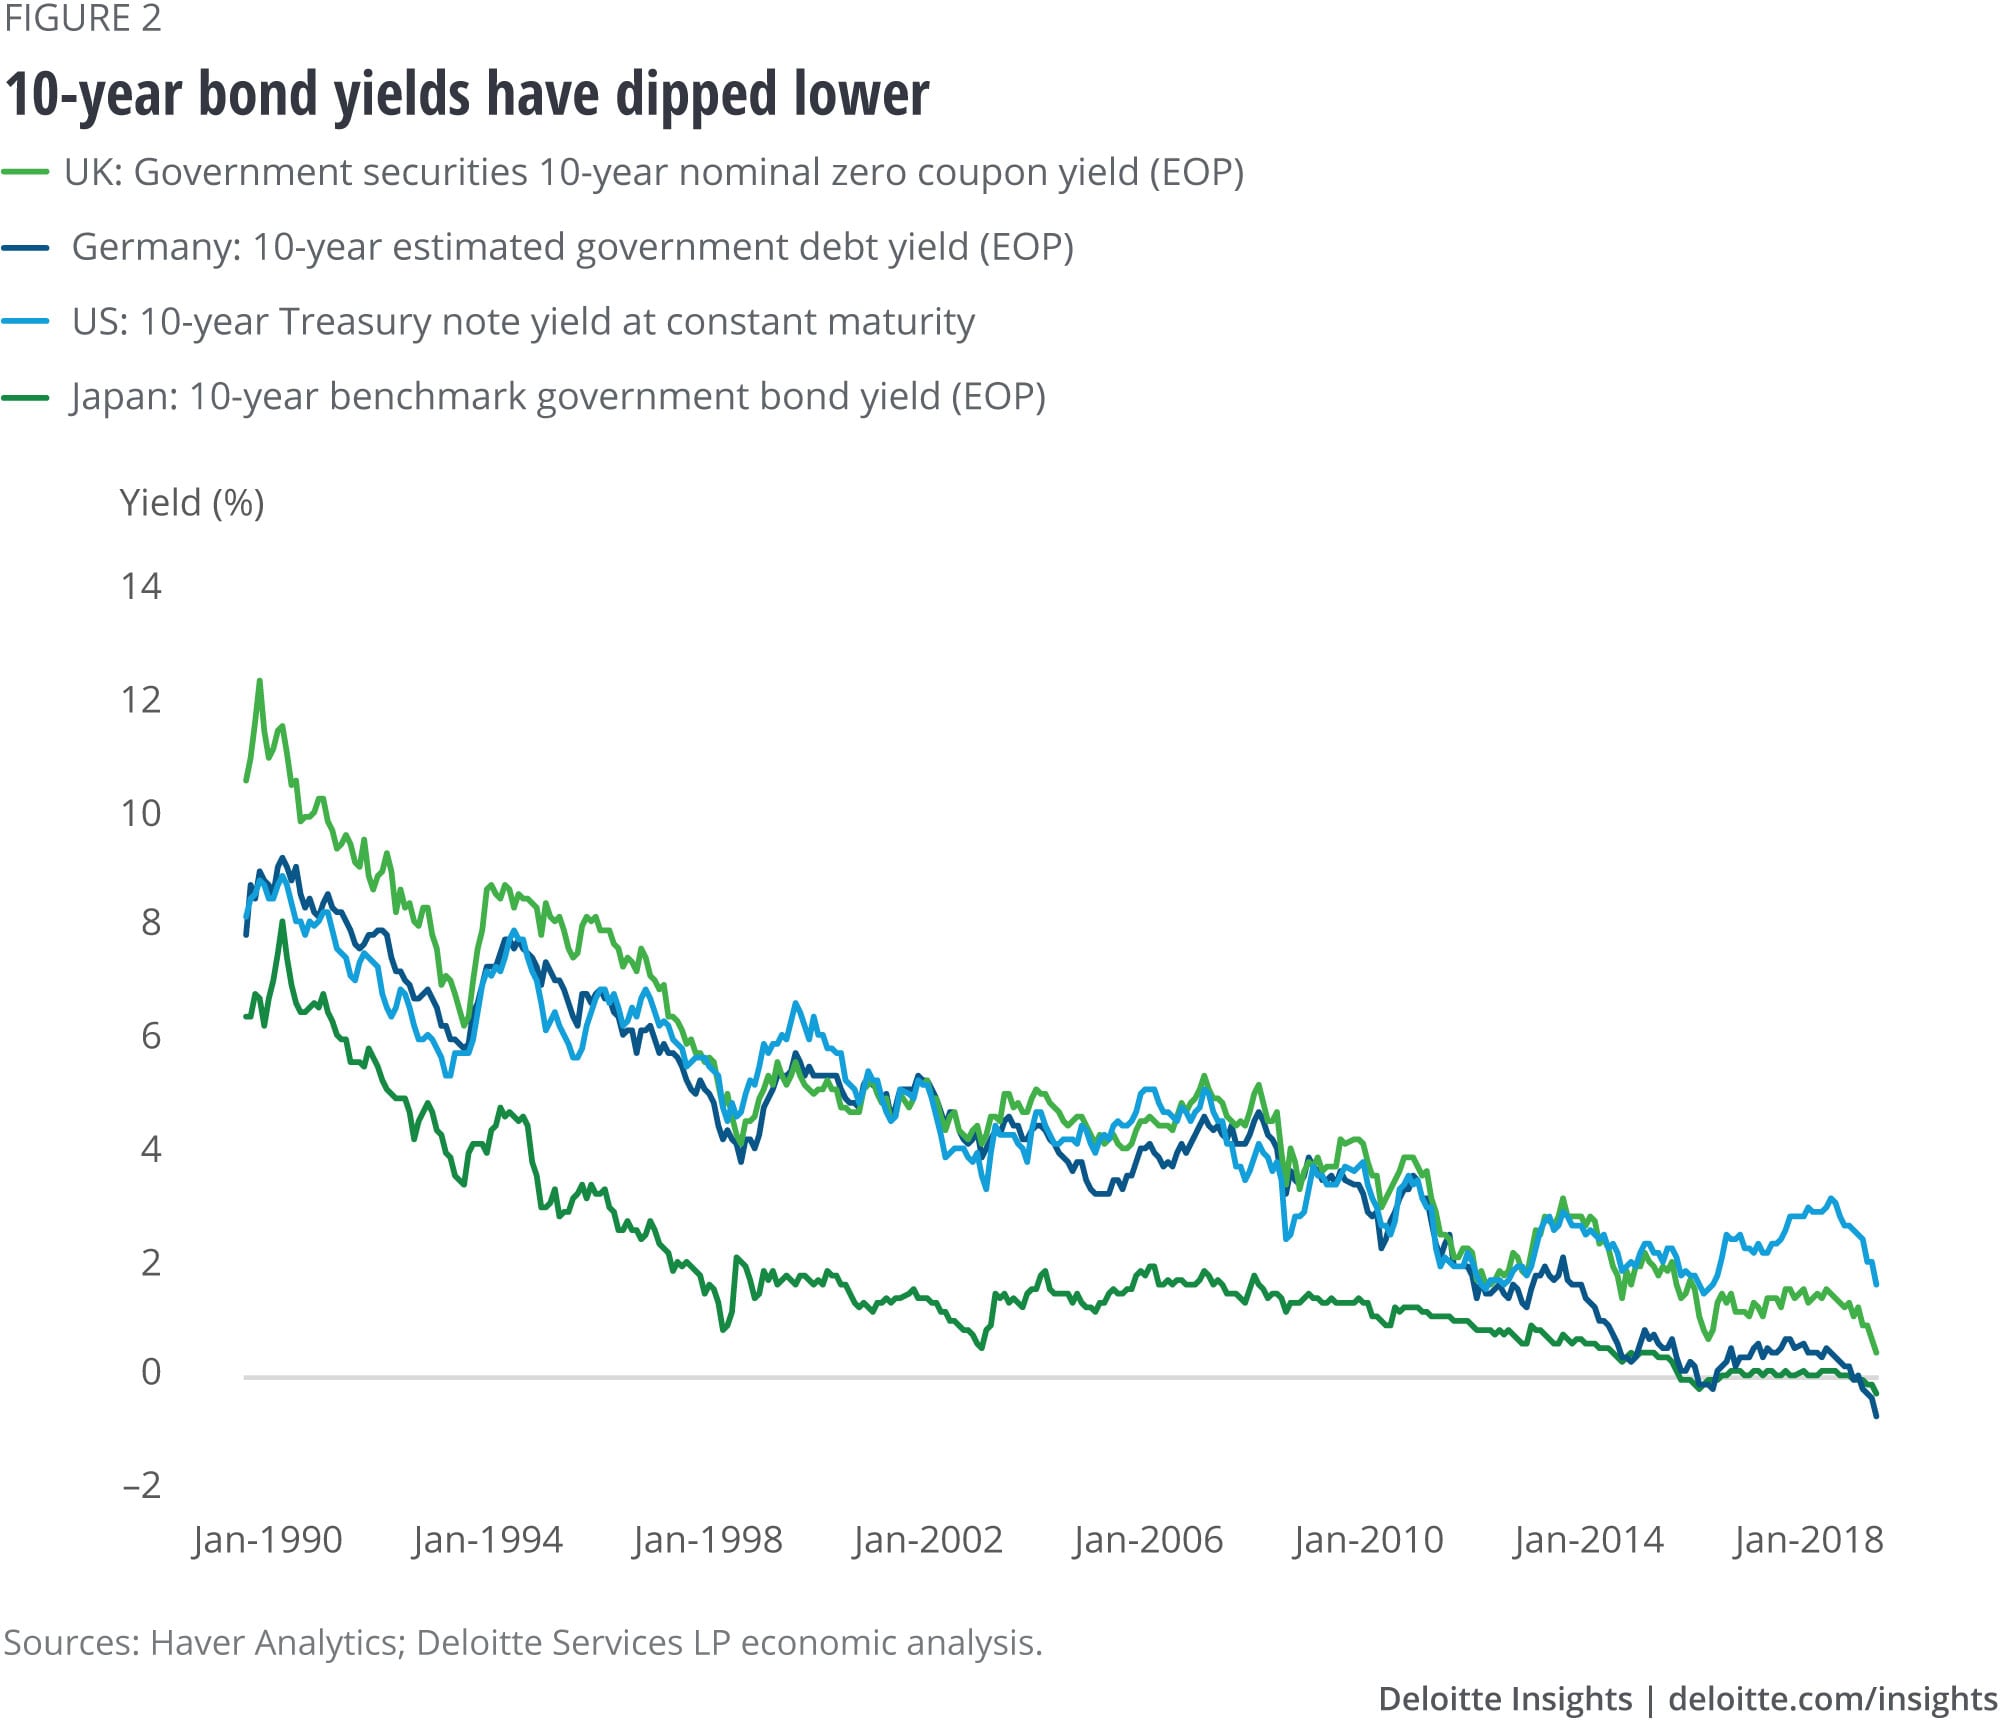 The 10-year bond yields have dipped lower